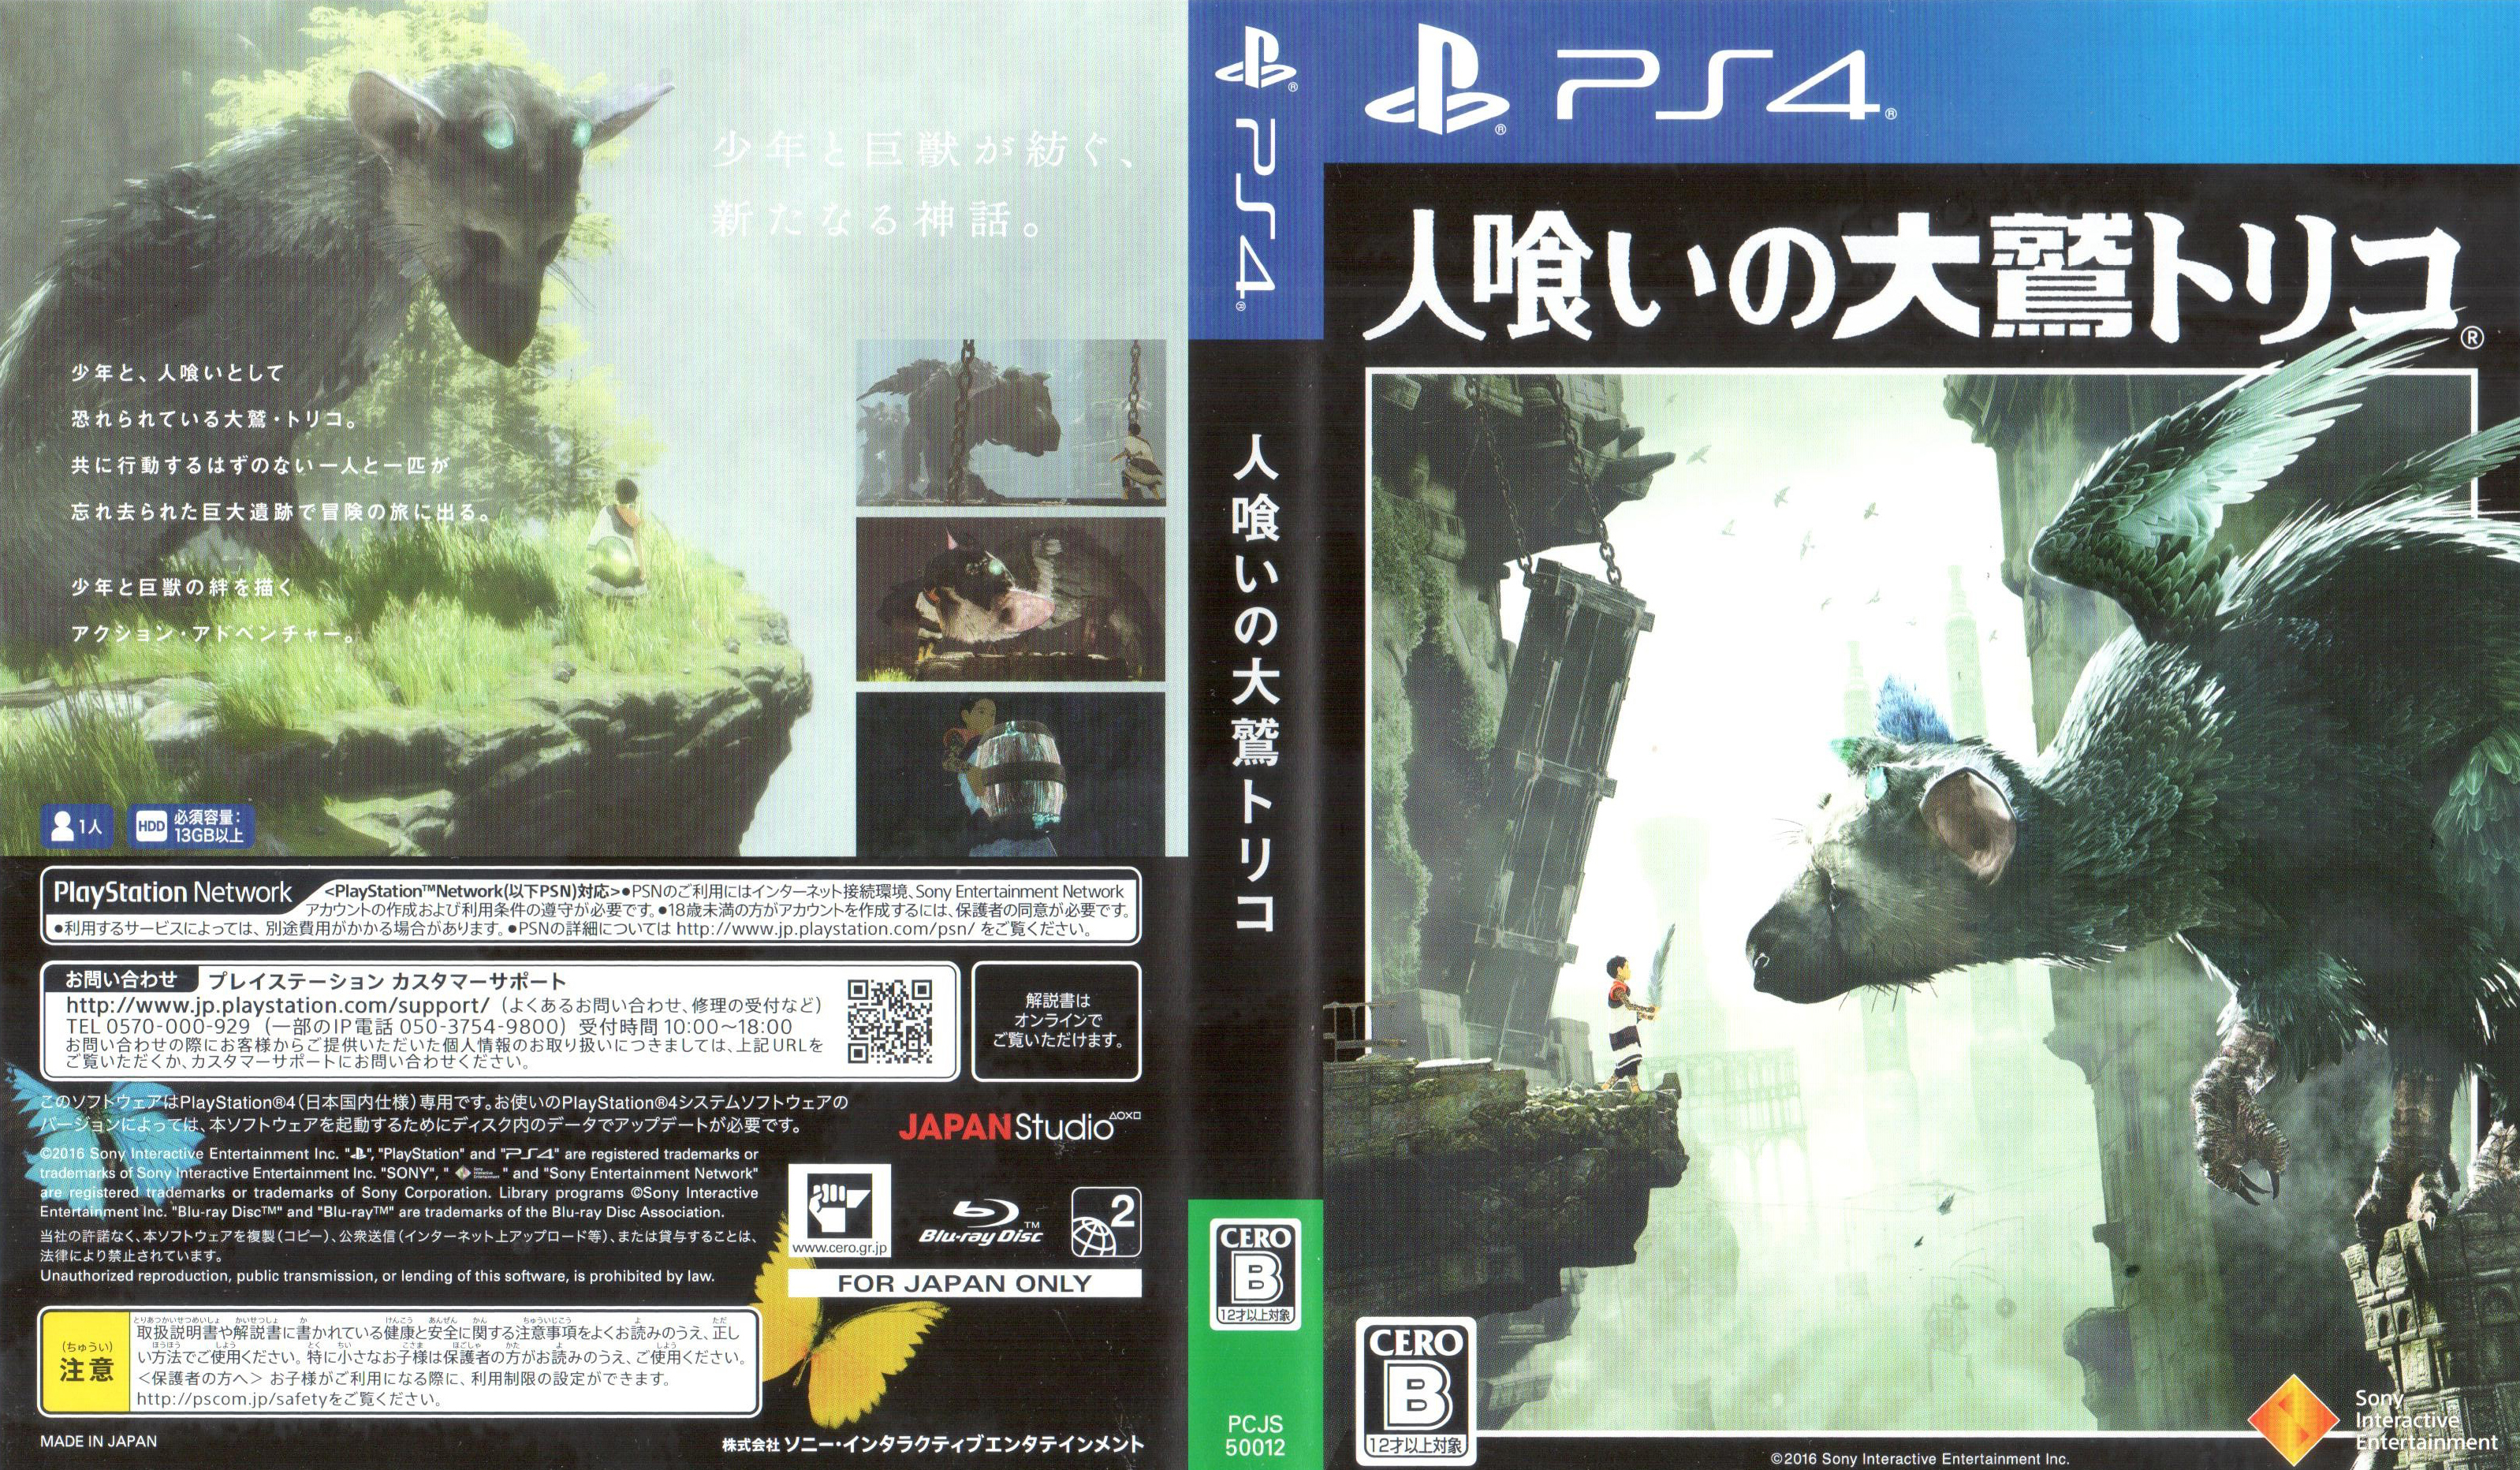 The Last Guardian lives, and it's coming to PS4 in 2016